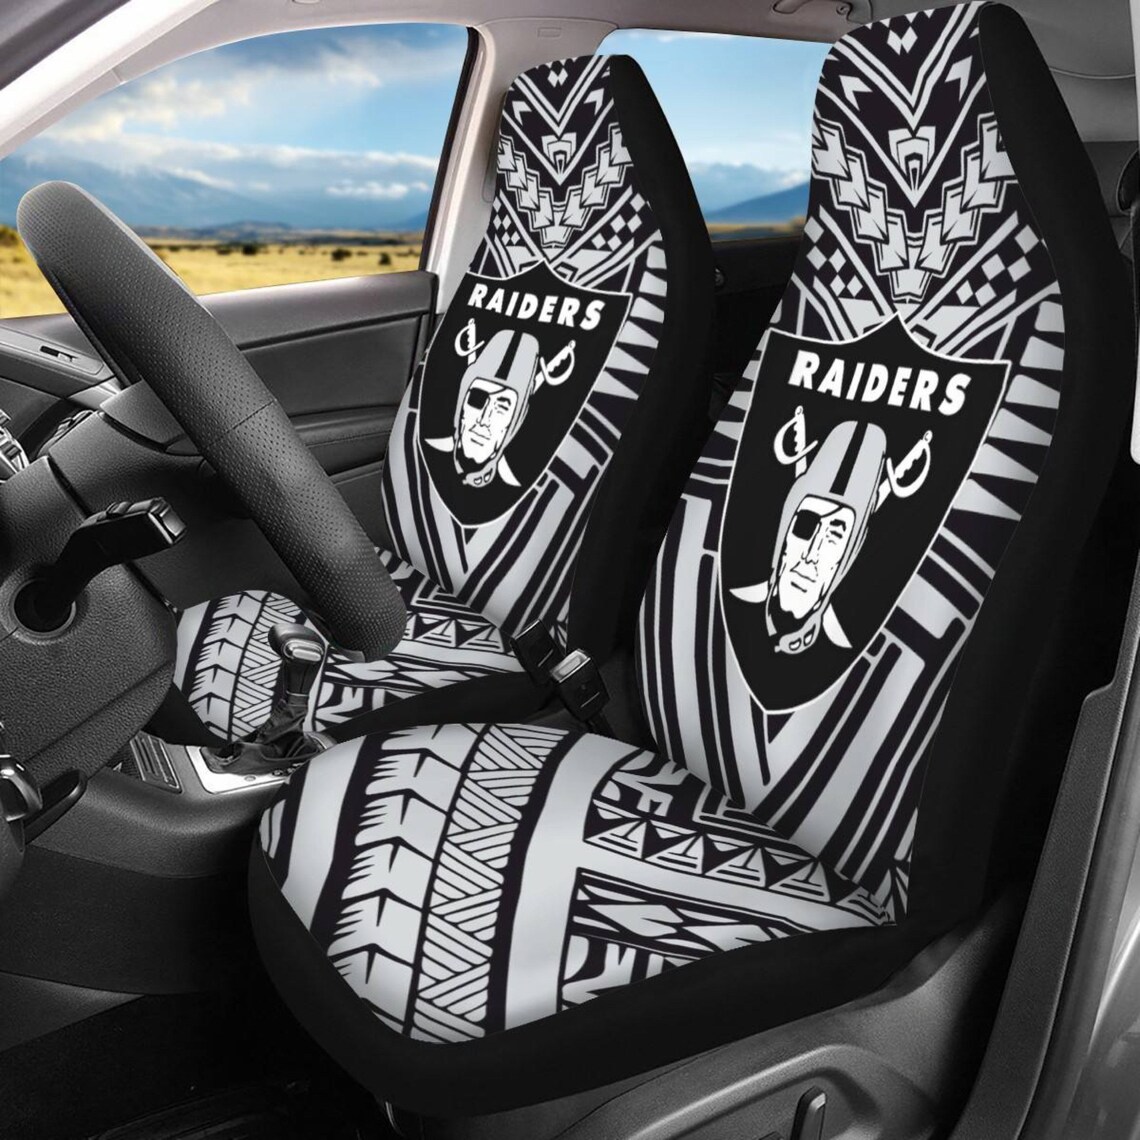 Football Tribal Car Seat Covers set of 2 - Etsy